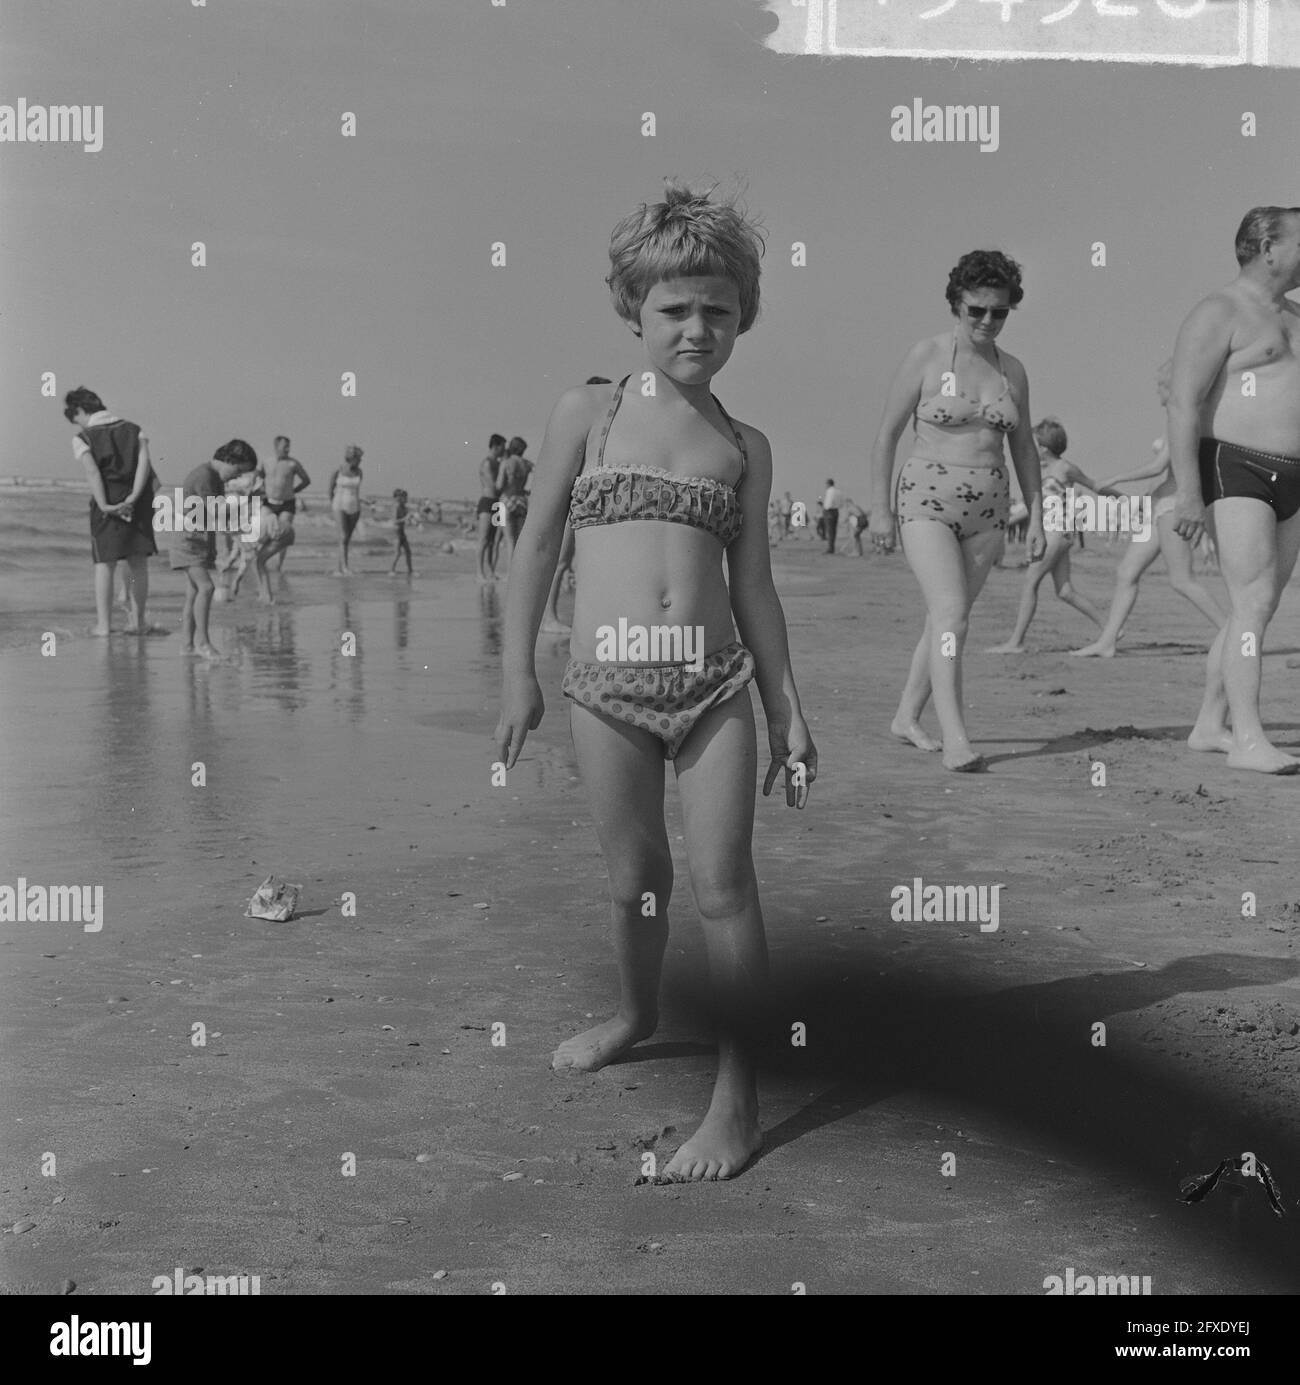 https://c8.alamy.com/comp/2FXDYEJ/beach-fashion-1963-in-practice-on-the-zandvoort-beach-little-girl-with-bikini-august-14-1963-bikinis-girls-beaches-the-netherlands-20th-century-press-agency-photo-news-to-remember-documentary-historic-photography-1945-1990-visual-stories-human-history-of-the-twentieth-century-capturing-moments-in-time-2FXDYEJ.jpg